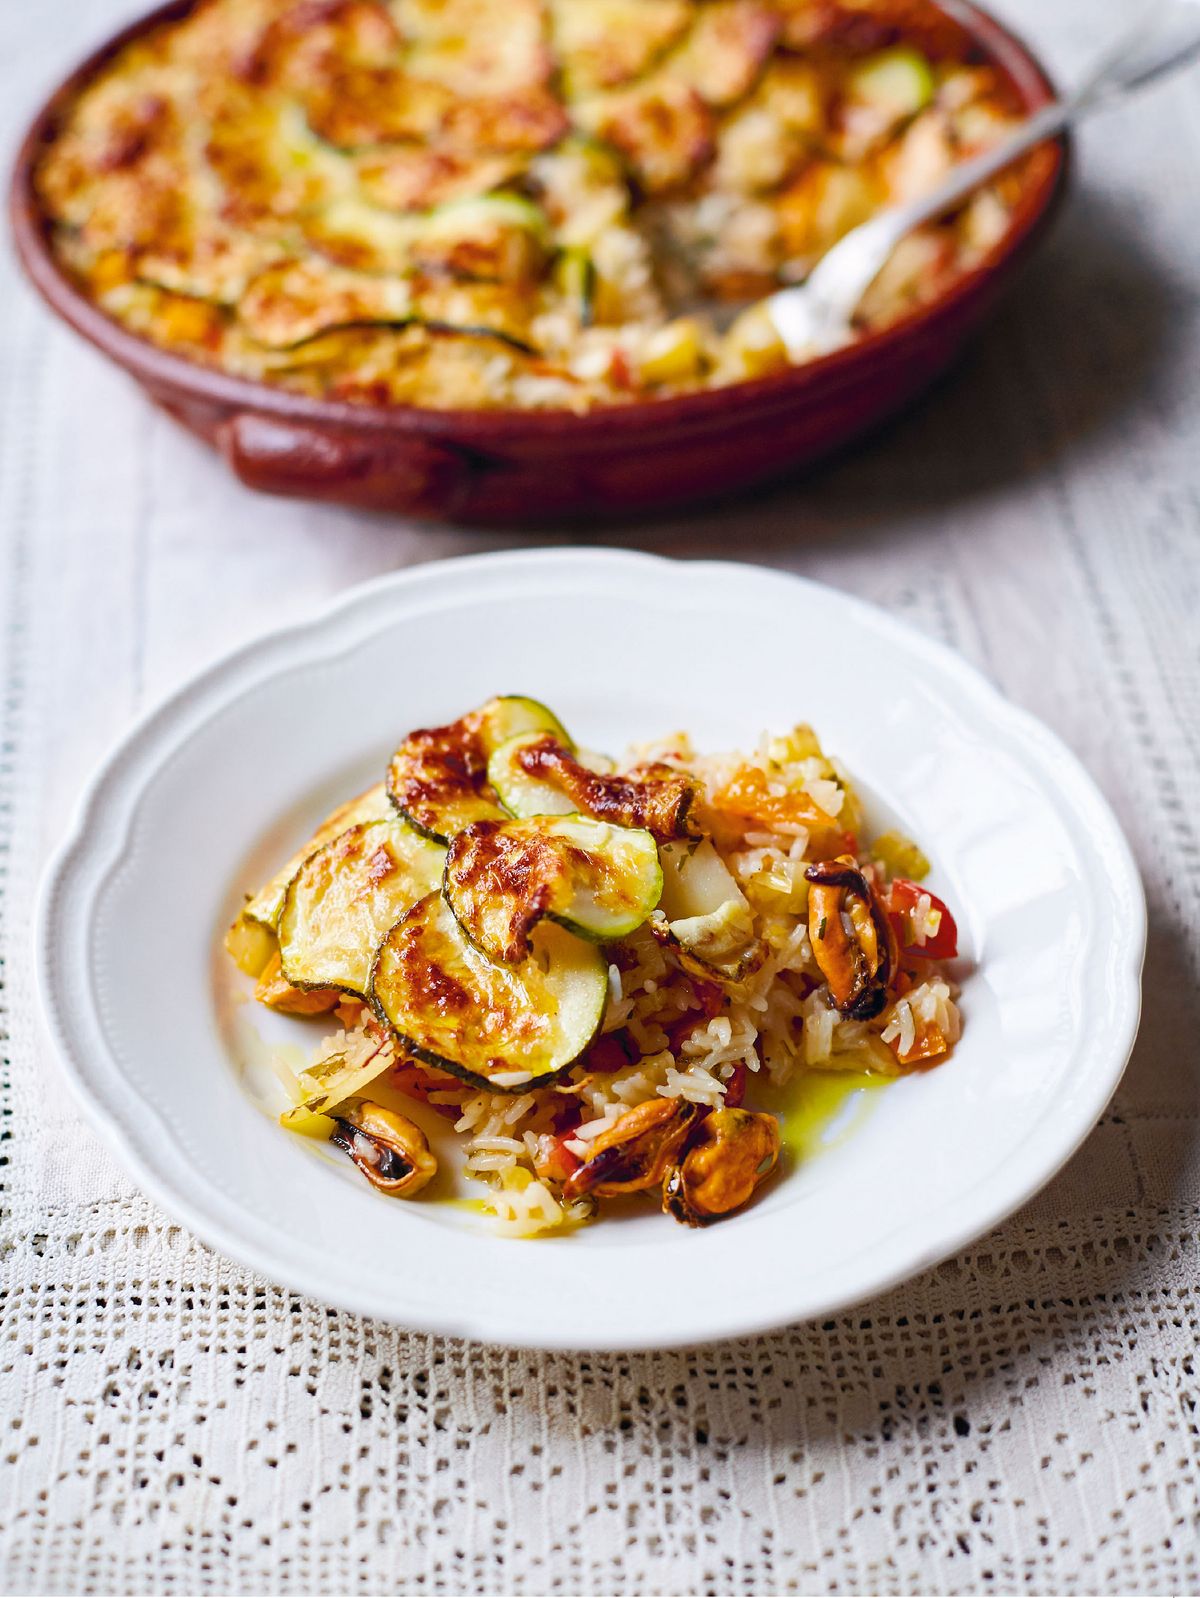 Jamie Oliver’s Baked Tiella Rice with Mussels, Courgette, Cherry Tomatoes, White Wine and Parmesan